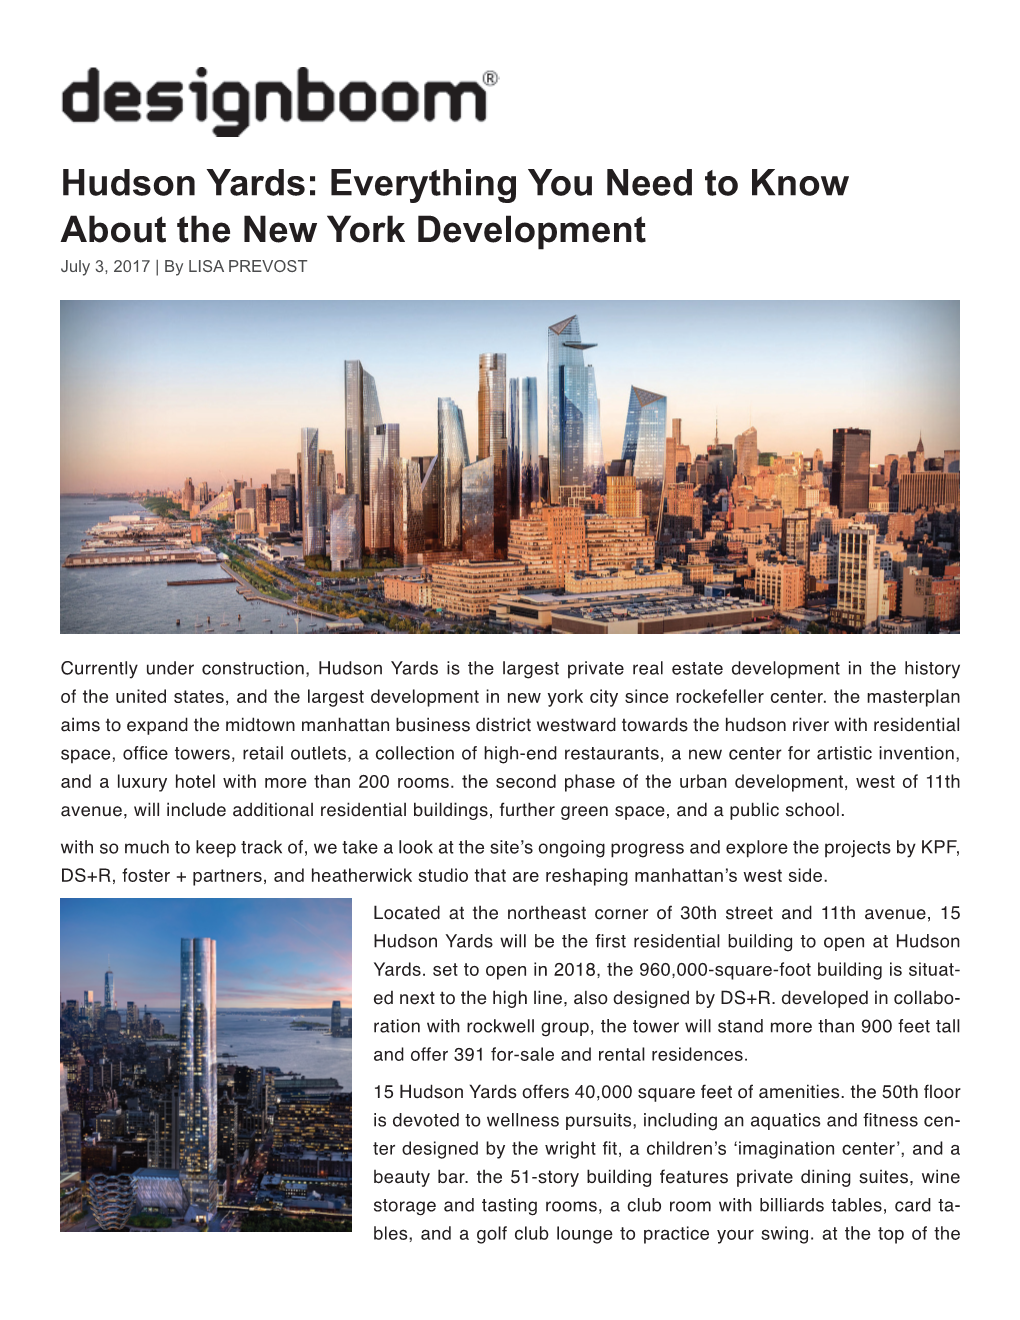 Hudson Yards: Everything You Need to Know About the New York Development July 3, 2017 | by LISA PREVOST